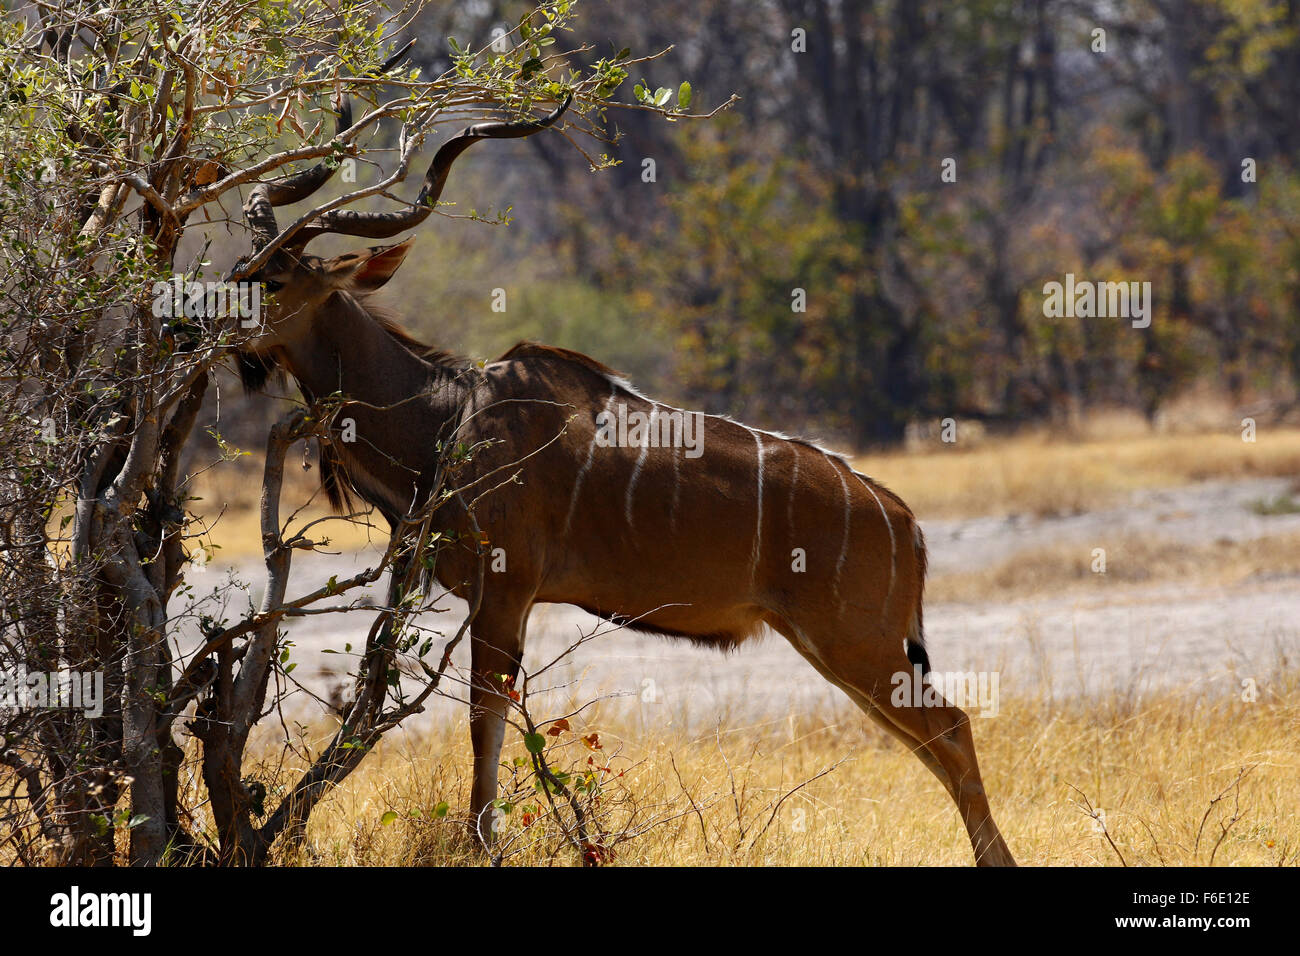 Greater kudus have a life span of 7 to 8 years in the wild, and up to 23 years in captivity. Stock Photo